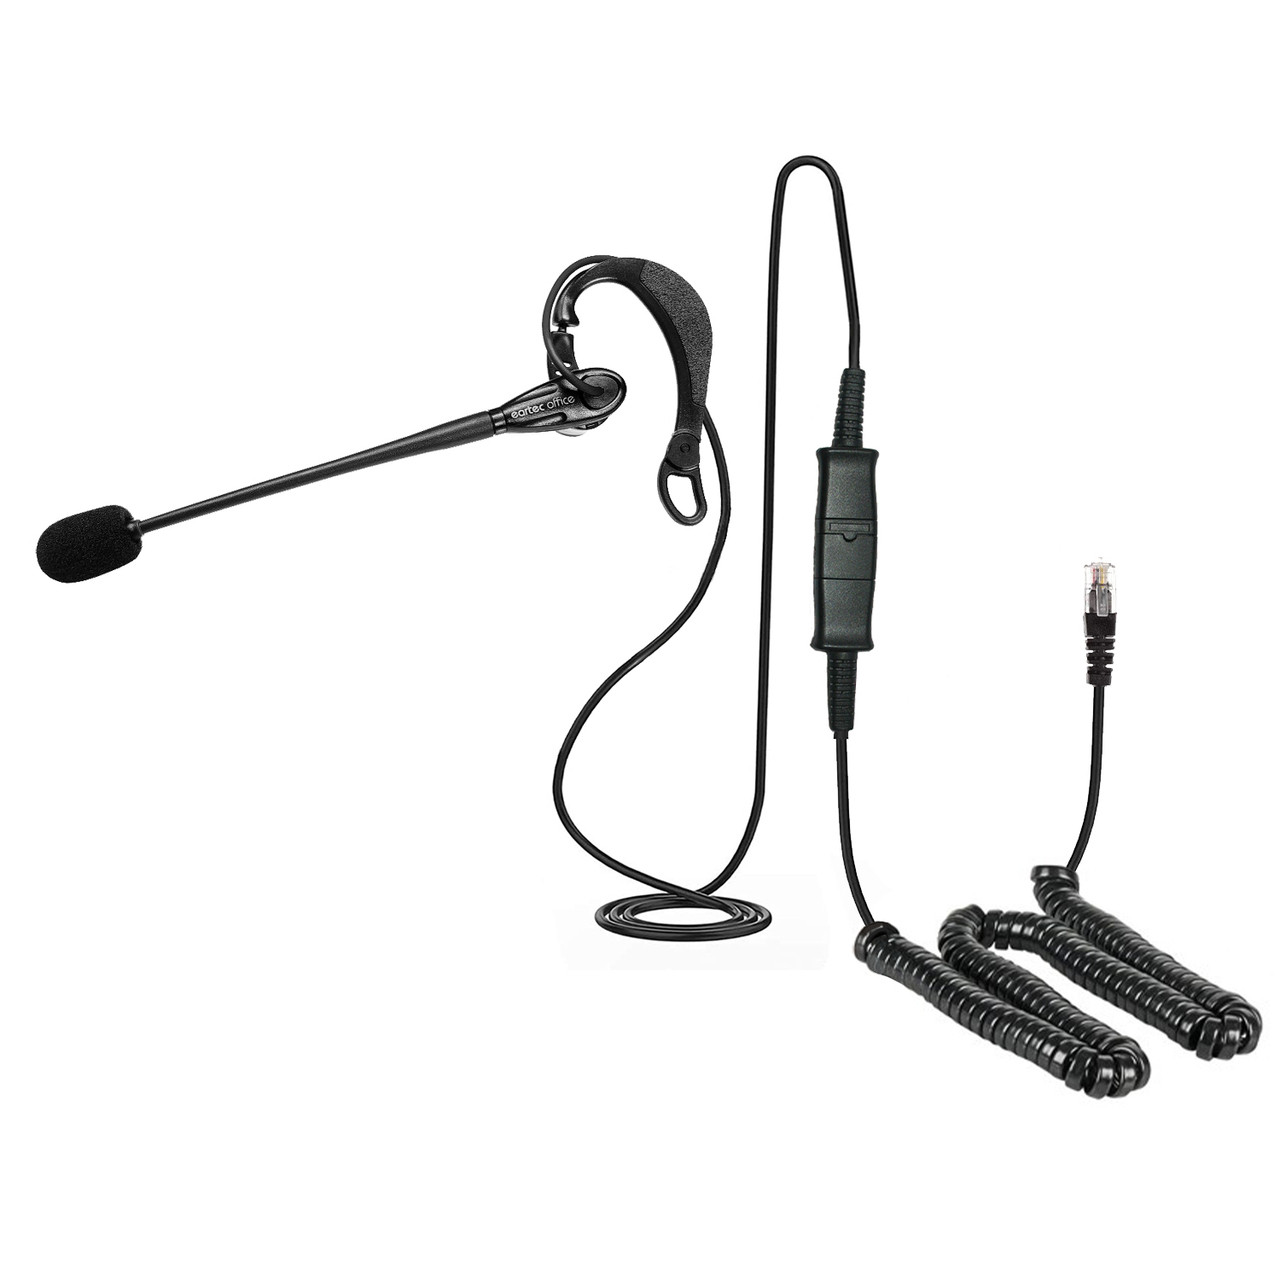 Samsung ITP 5017S Phone In-the-ear Headset - EAR200